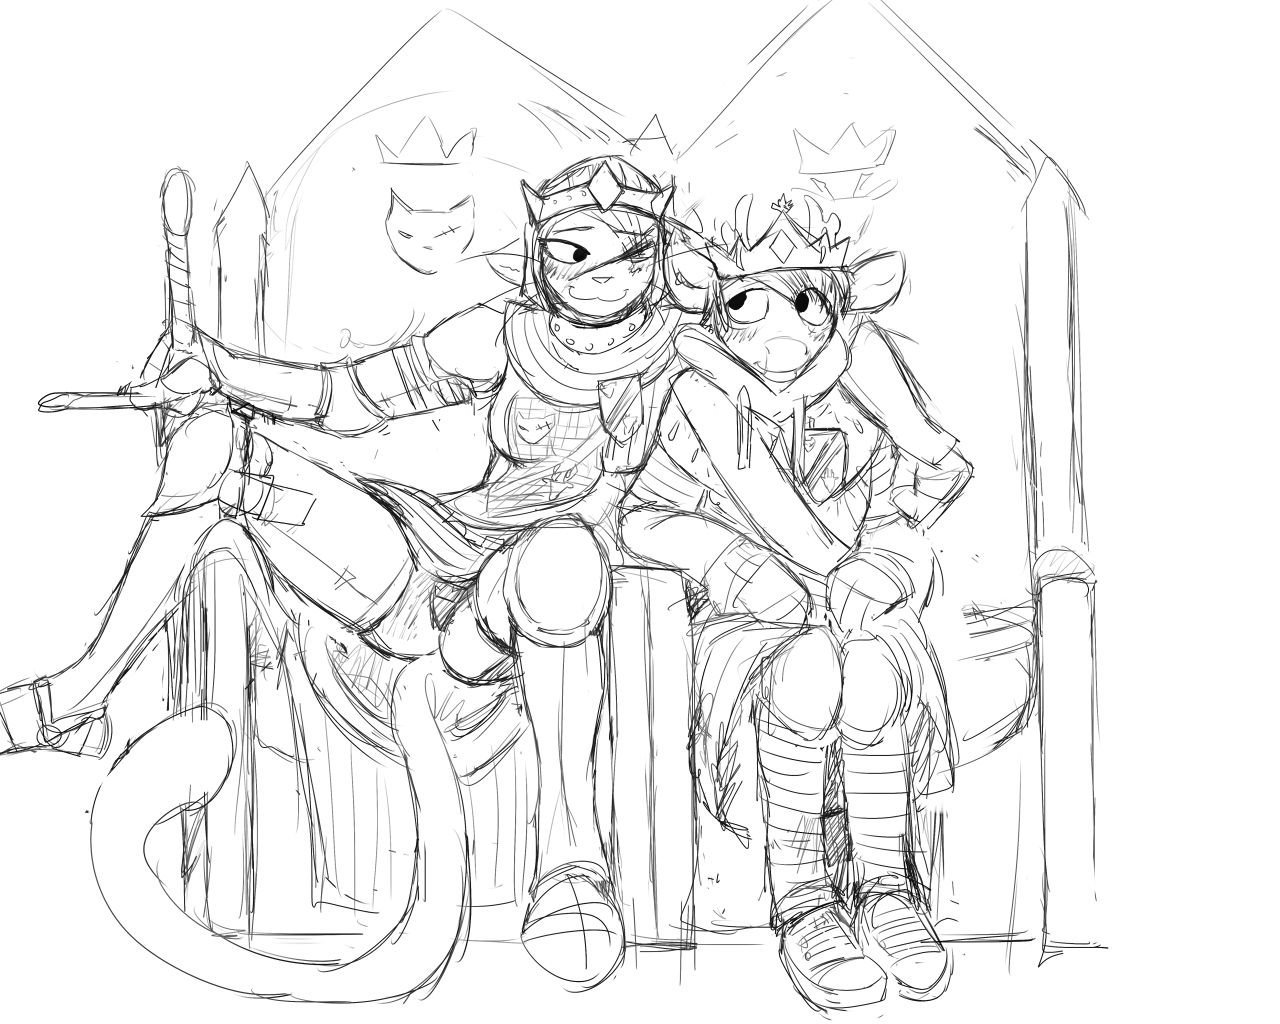 cat knight and deer prince - 2